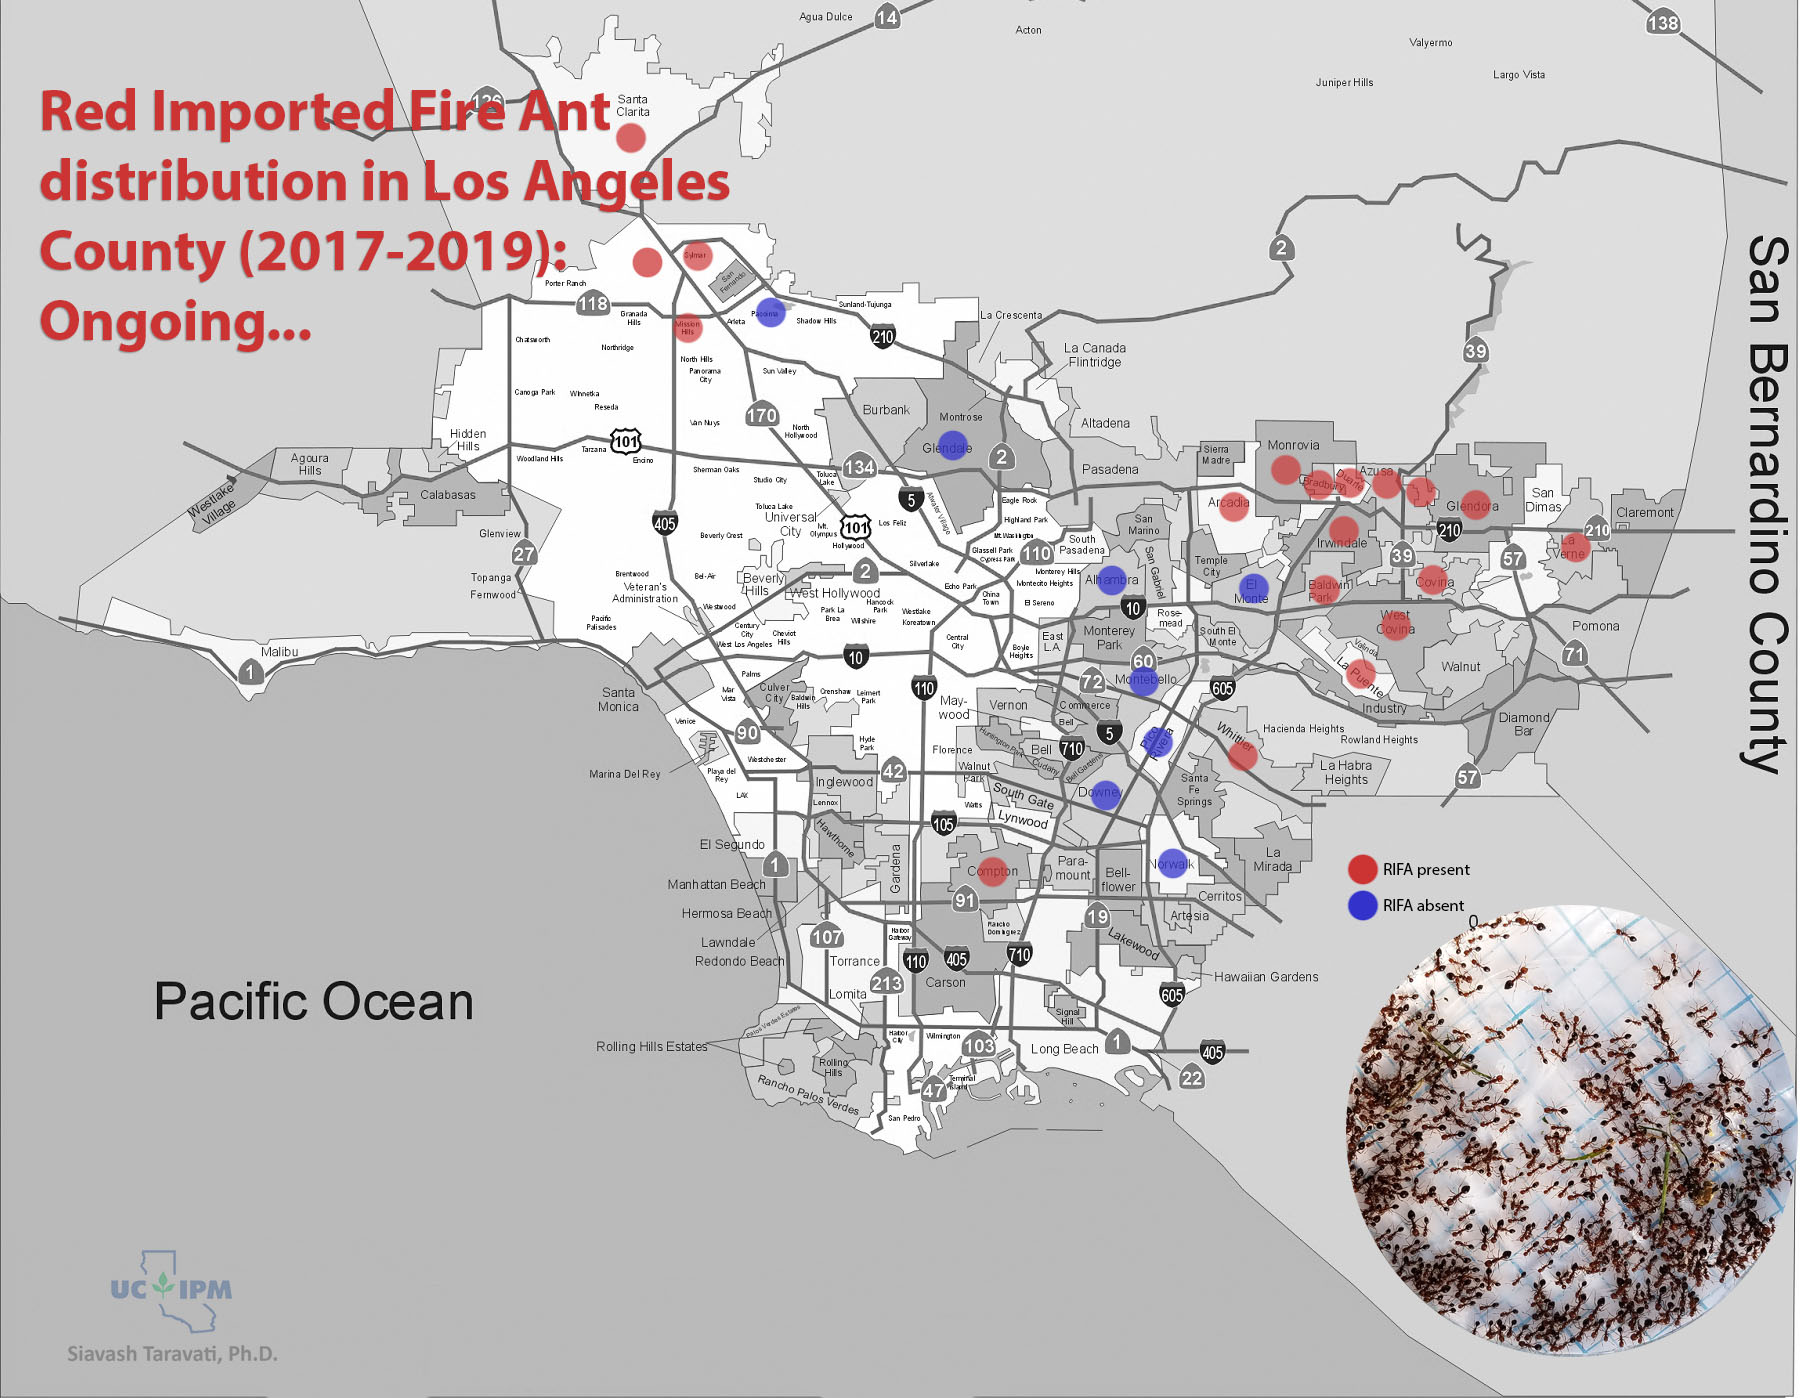 Rred Imported Fire Ant (RIFA) distribution in Los Angeles County. Map modified from Los Angeles Almanac’s ™ map of the County of Los Angeles.